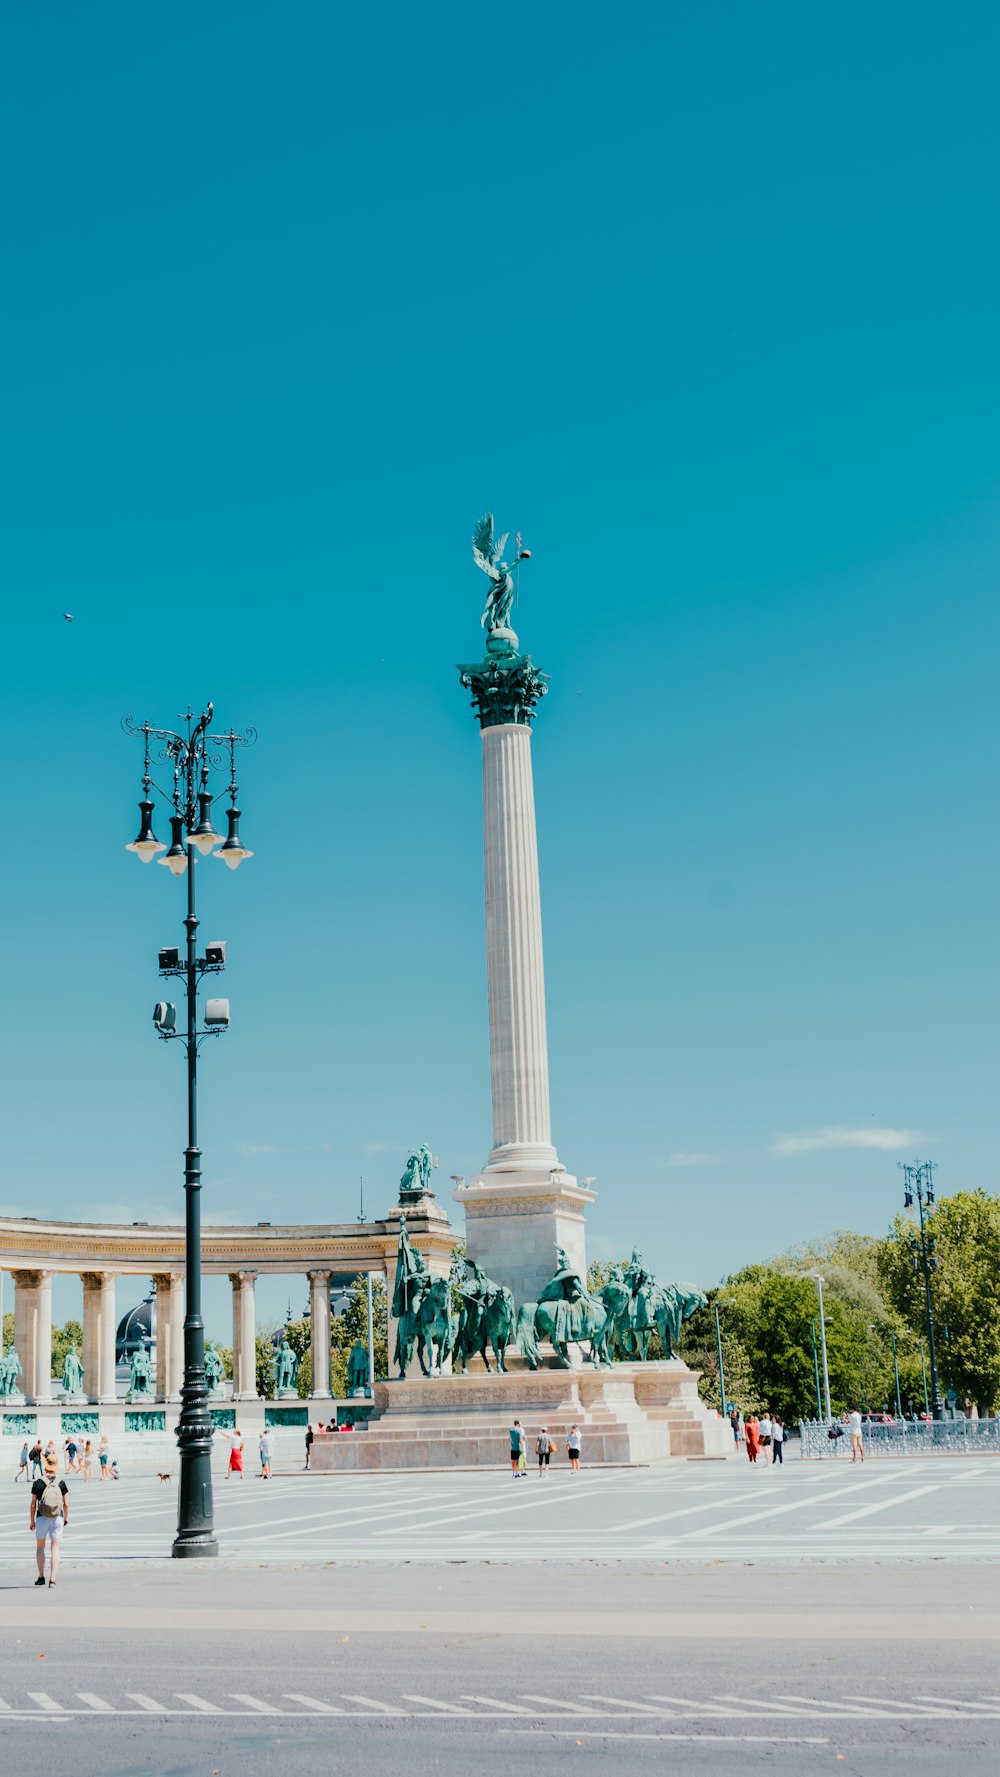 a statue of a person holding a torch in front of a monument